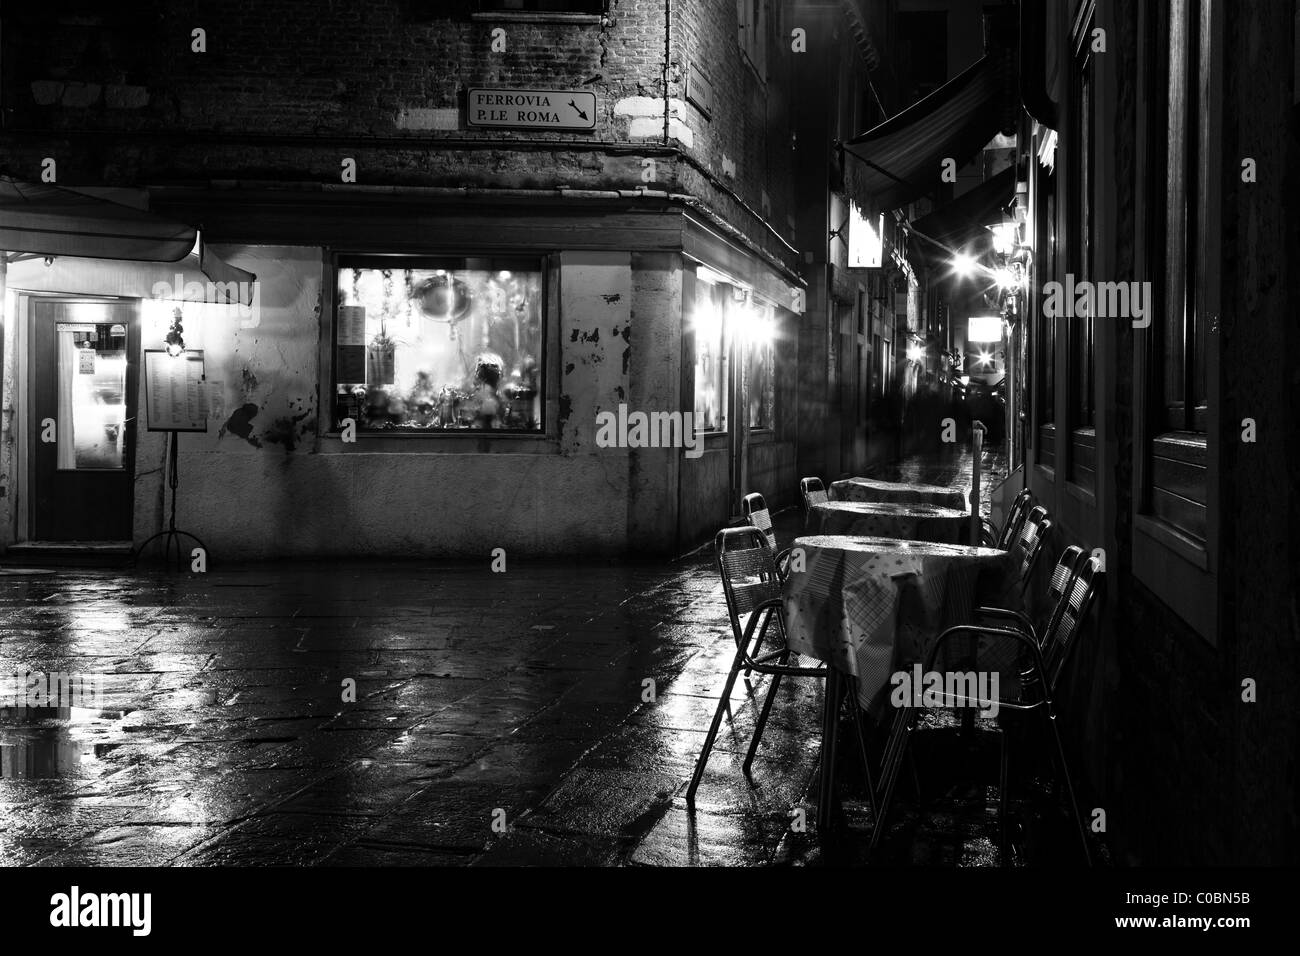 View of an empty outdoor café at night, B&W Stock Photo